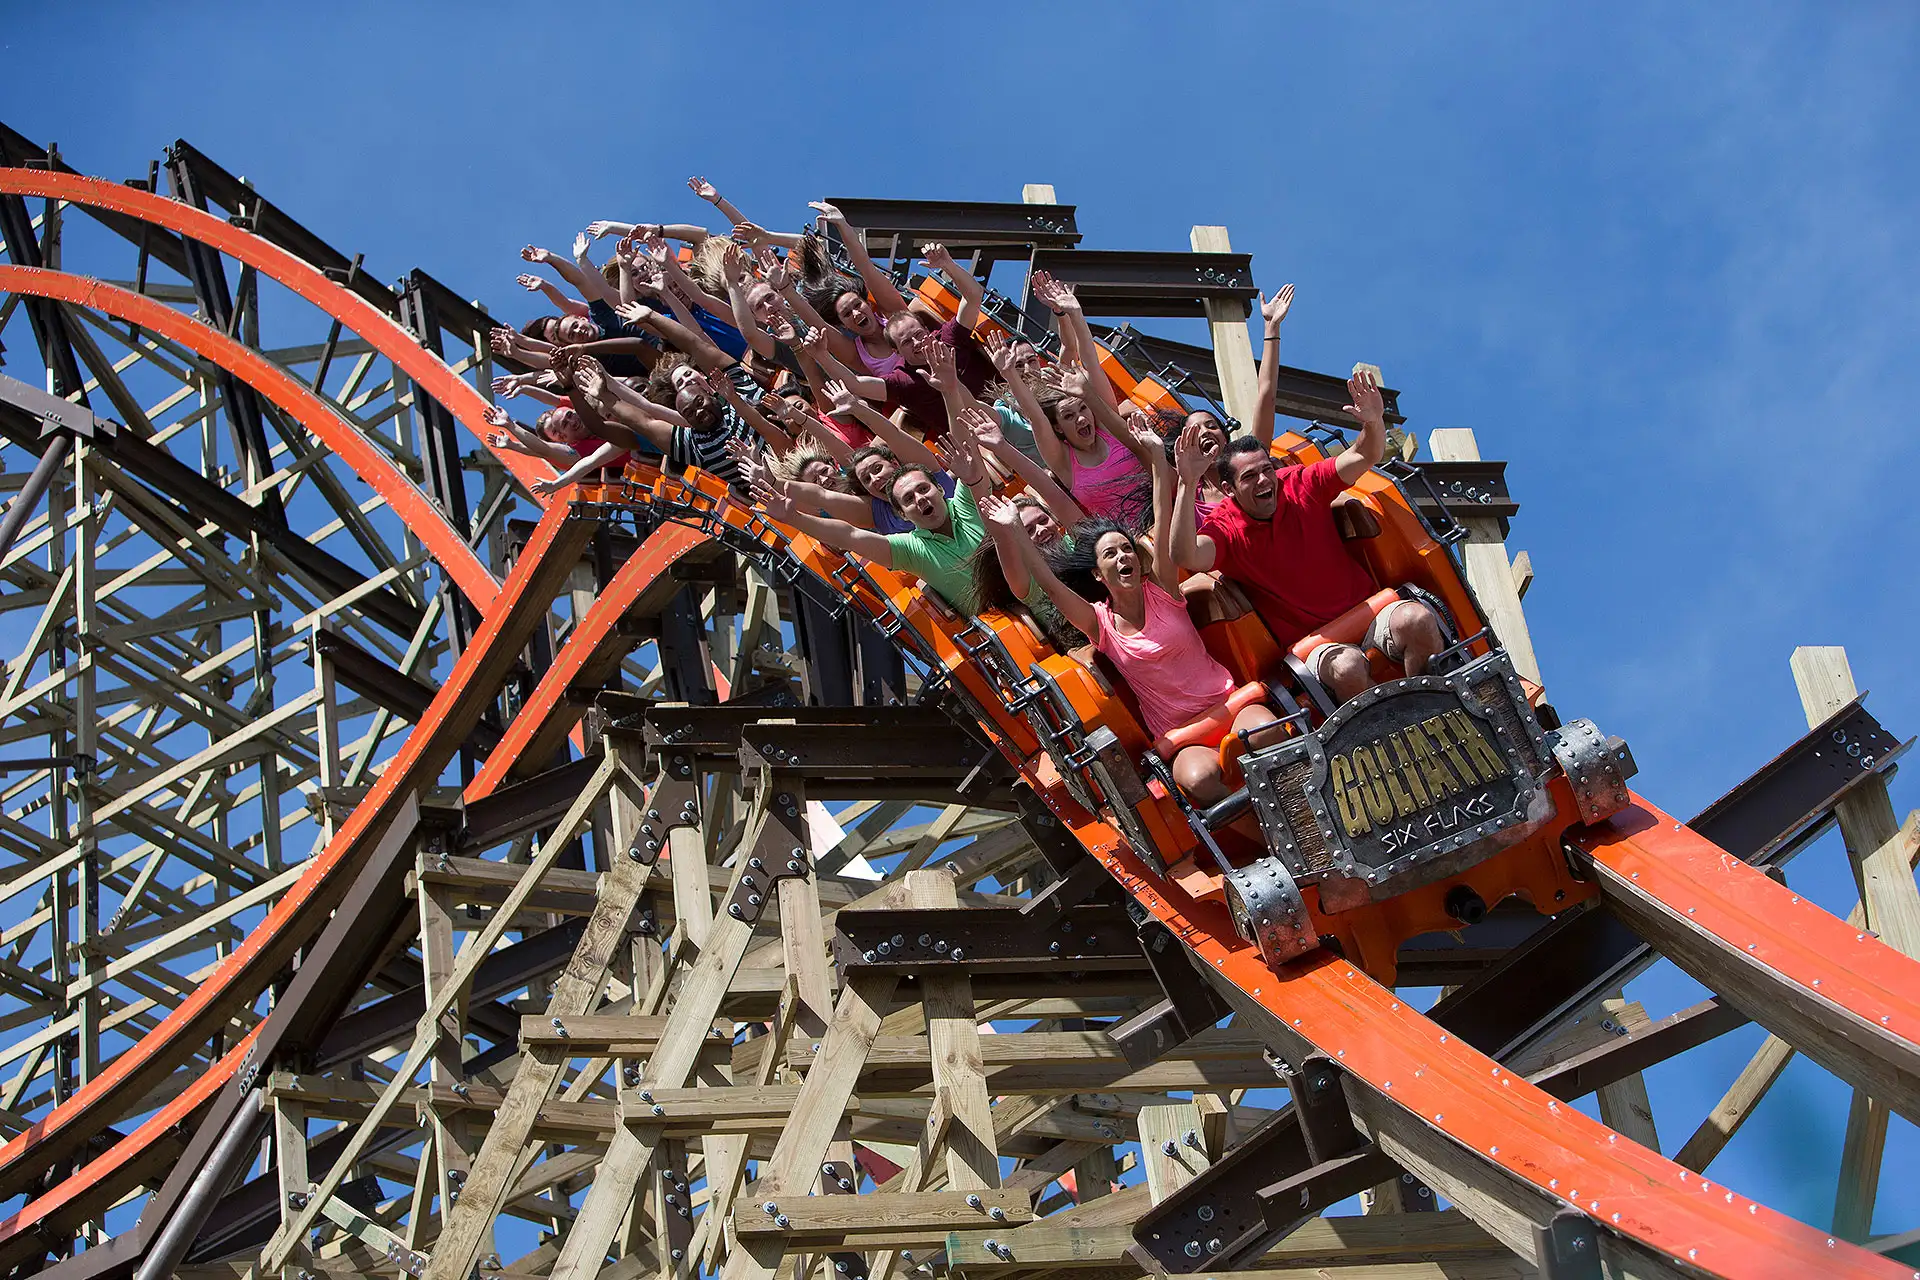 Goliath Roller Coaster; Courtesy of Six Flags Great America